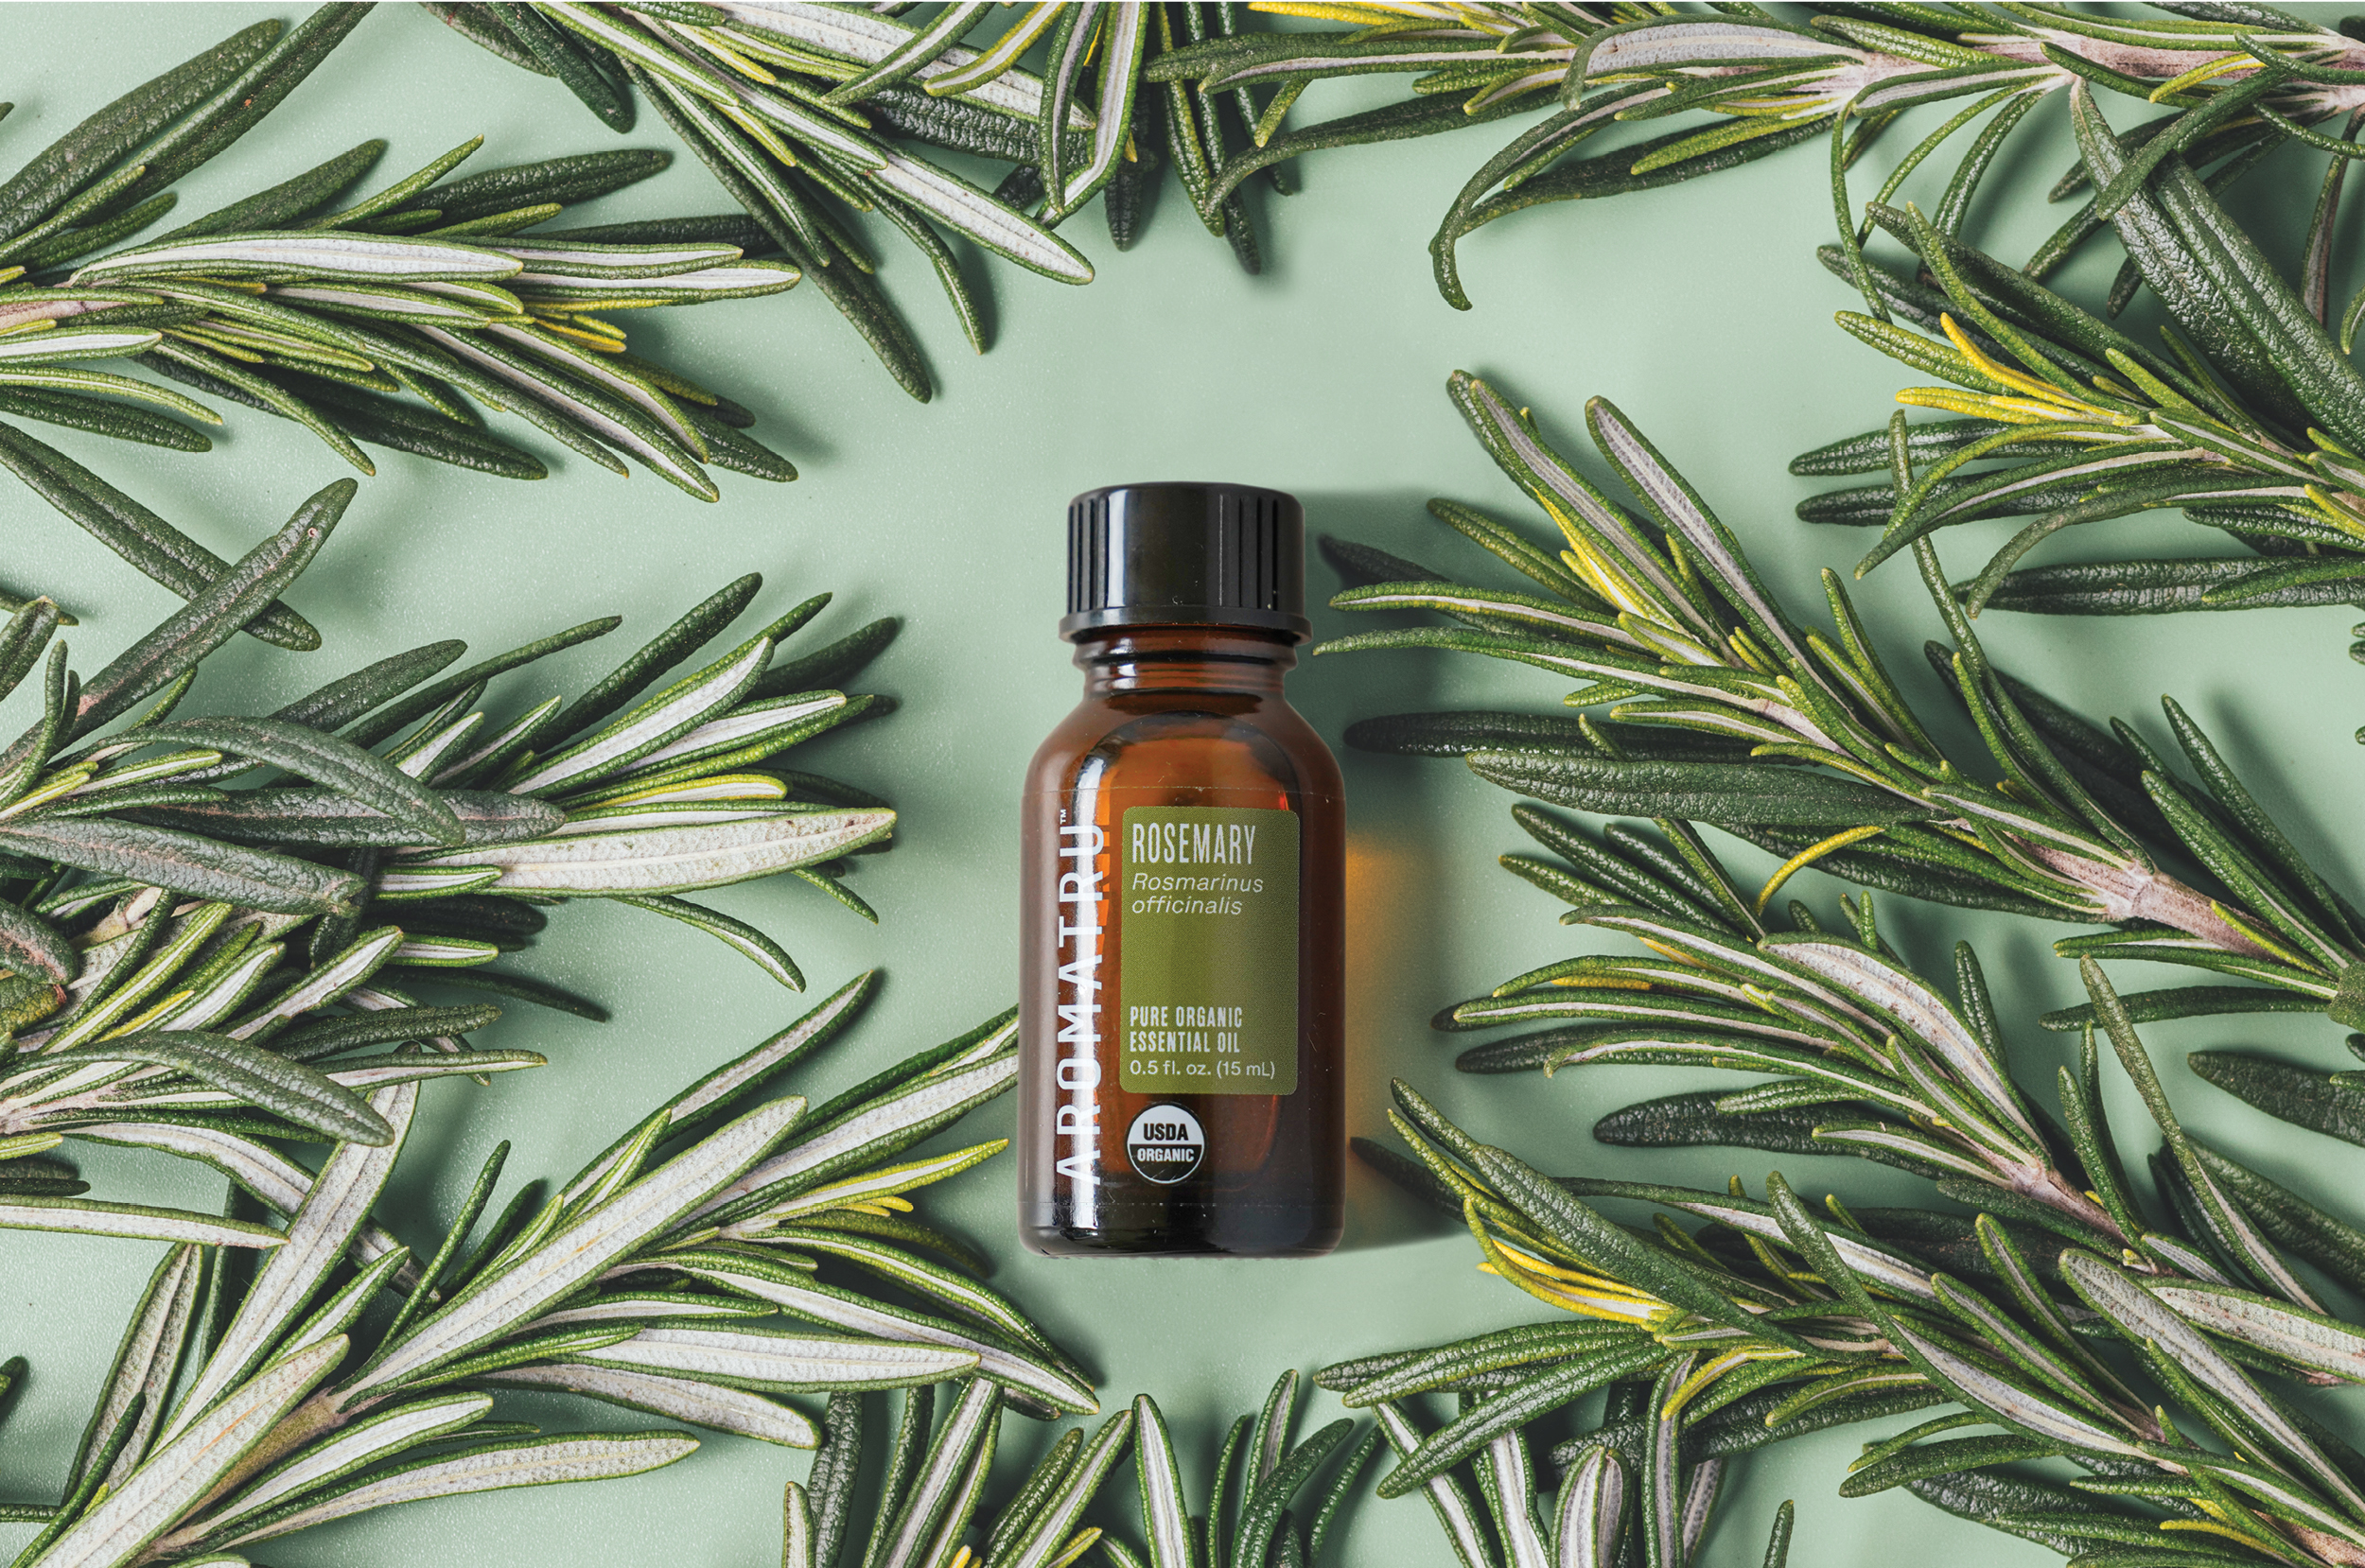 Organic Rosemary Essential Oil: Powerful and Productivity-Boosting